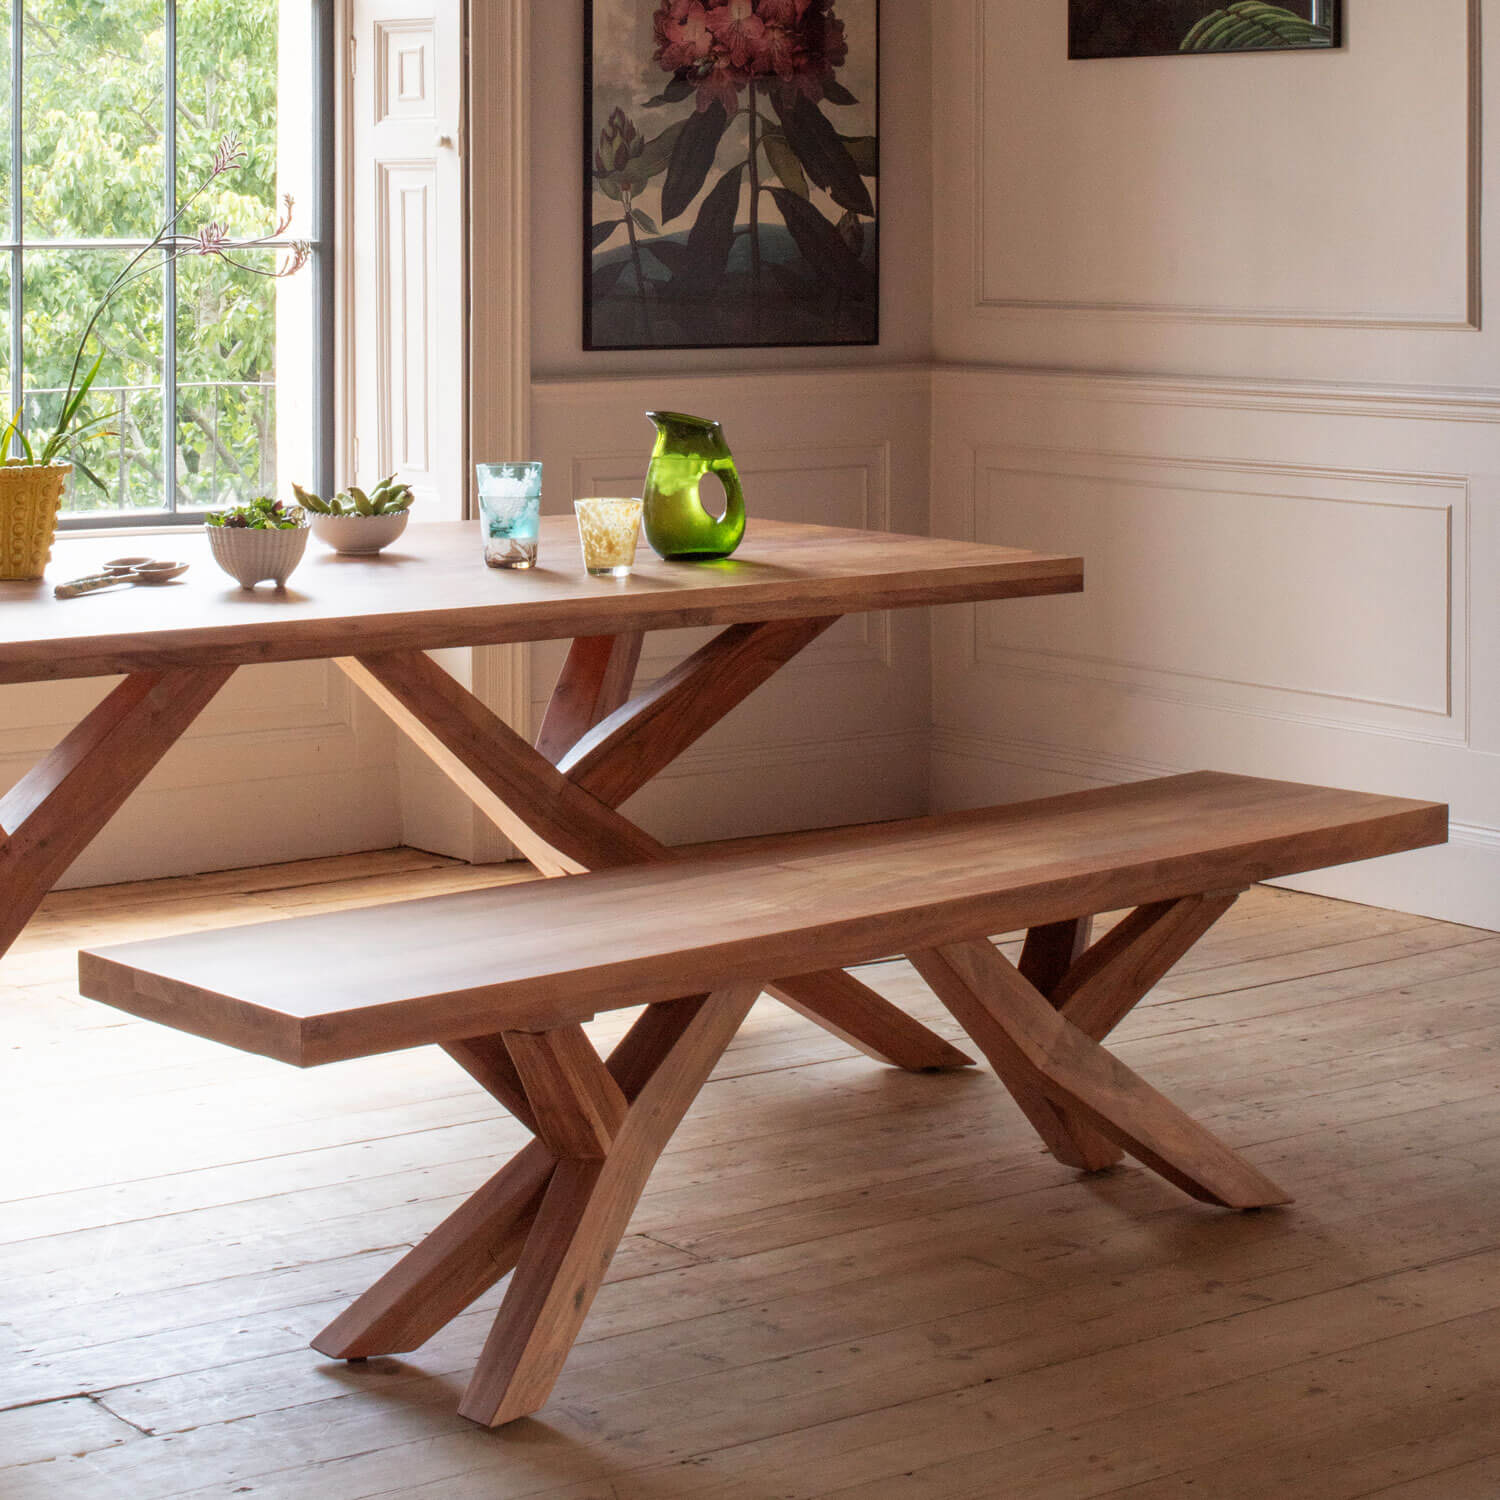 Read more about Graham and green simone two seater bench